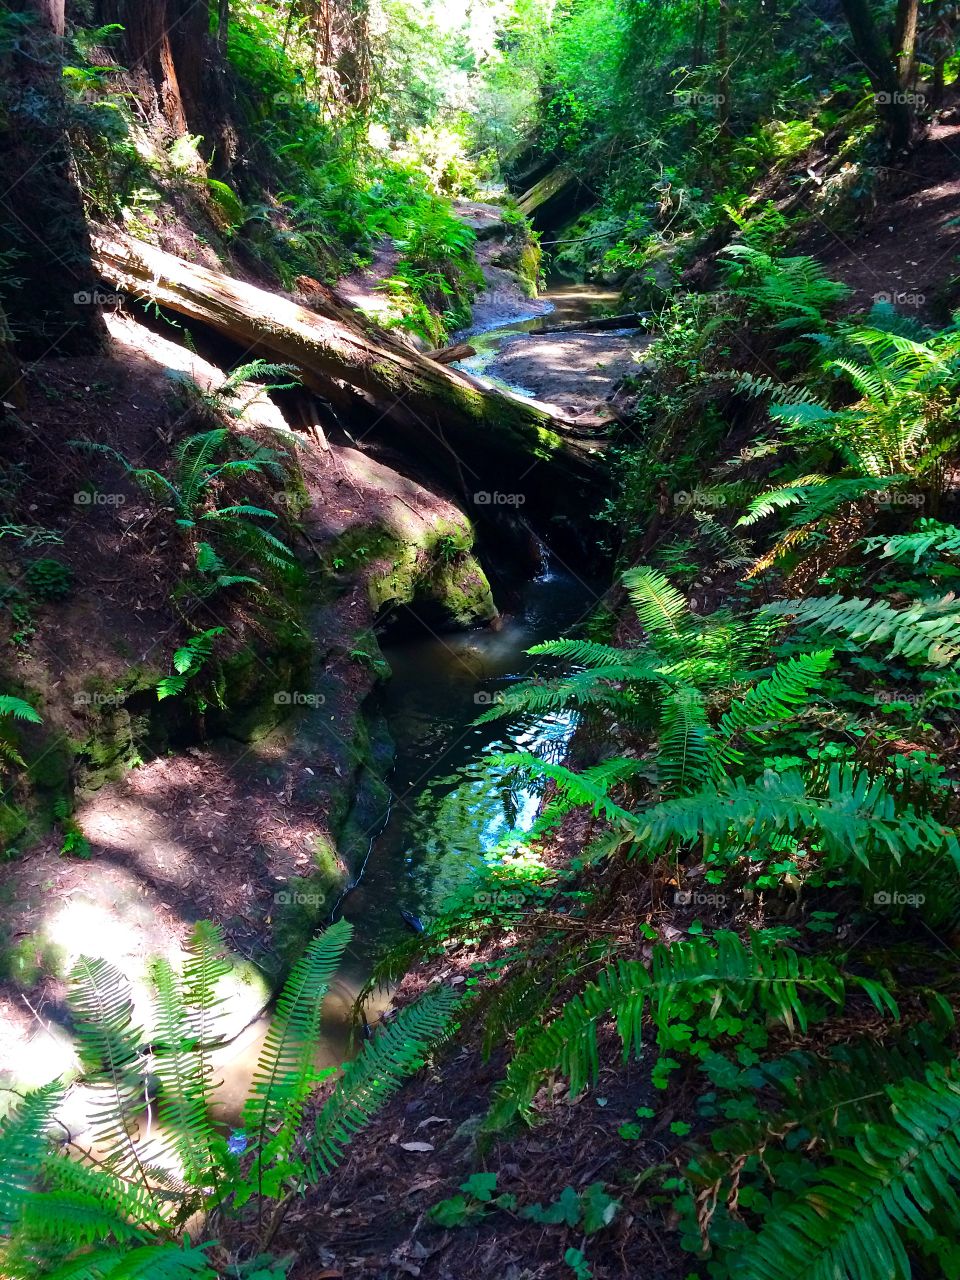 Outdoors nature . Taken in a redwood forest 